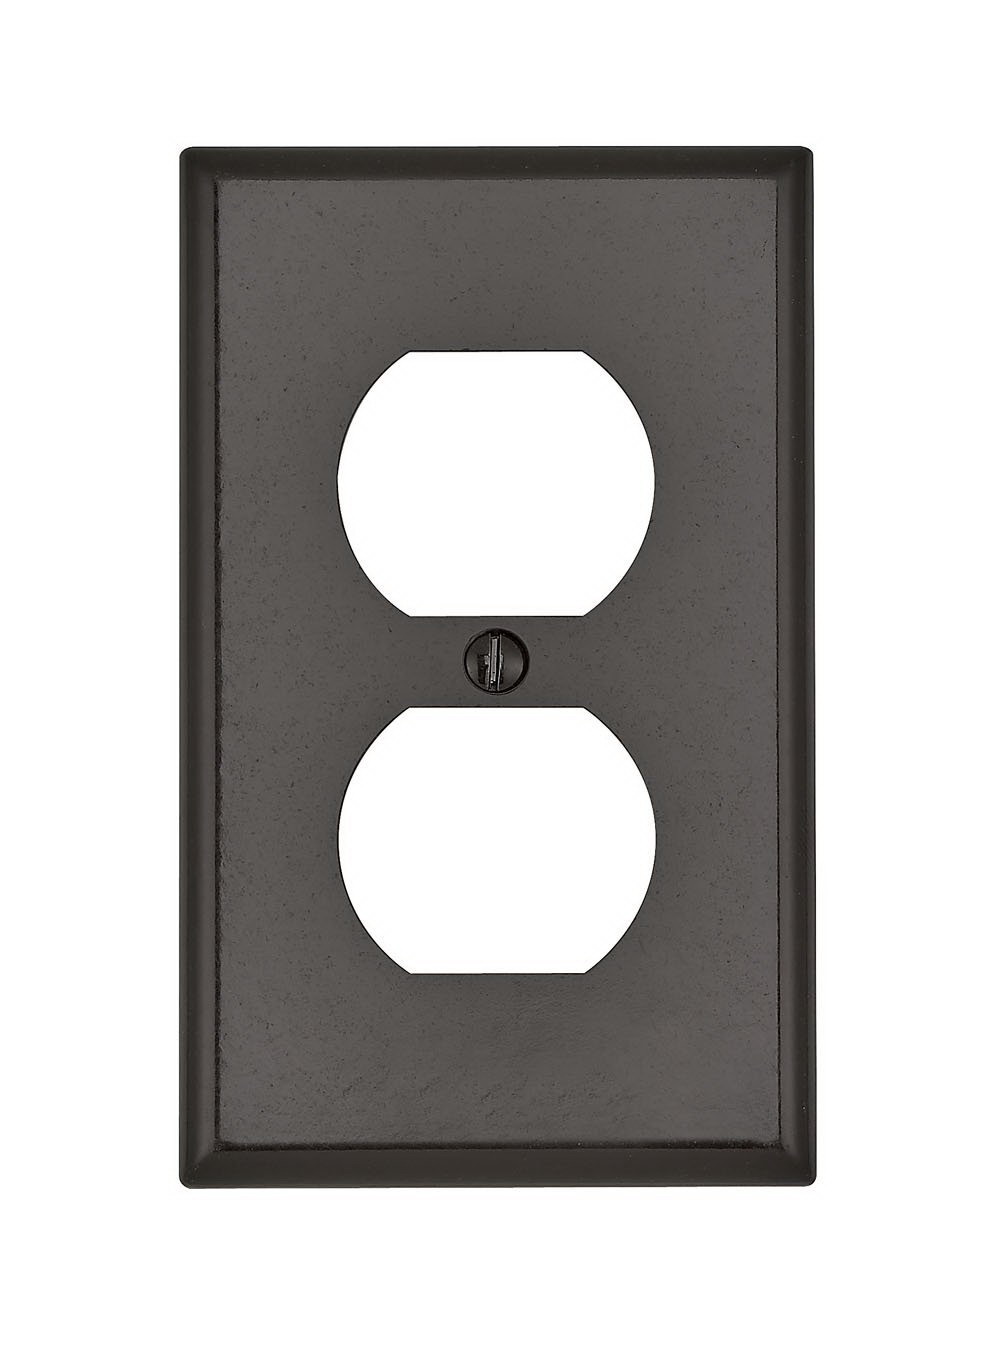 Leviton 85003 Receptacle Wallplate, 4-1/2 in L, 2-3/4 in W, 1 -Gang, Thermoset Plastic, Brown, Smoot